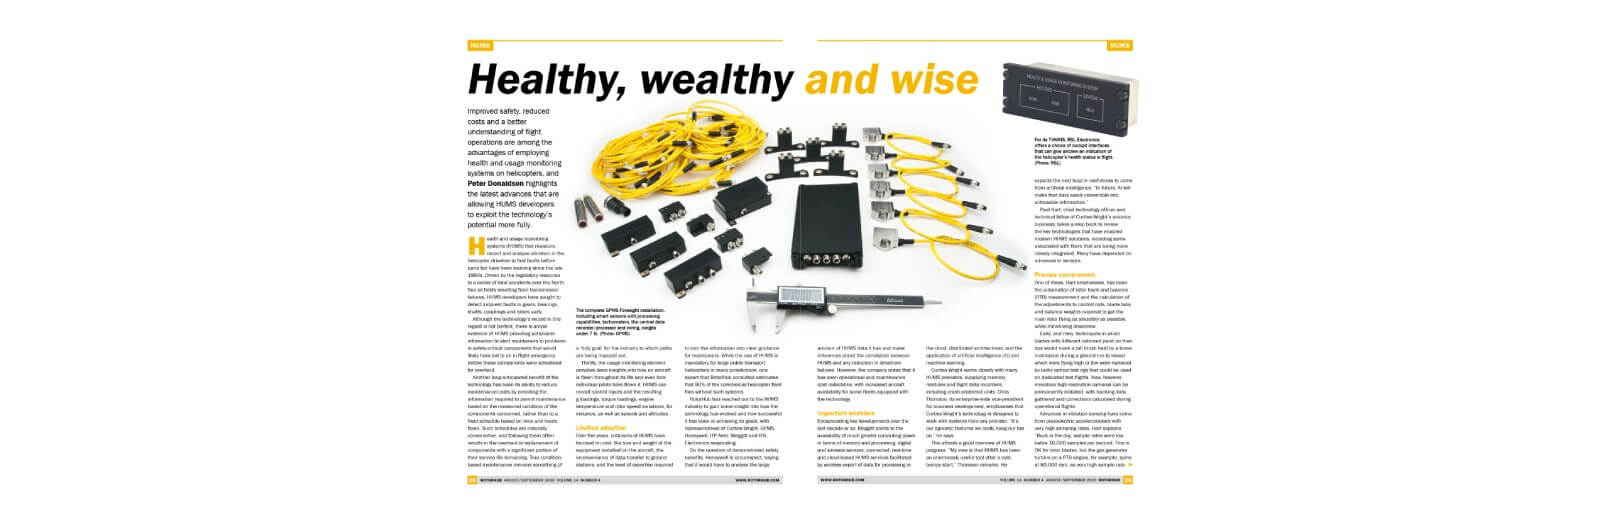 RotorHub Magazine highlights GPMS’s Foresight in article ‘Healthy, wealthy and wise’ featuring advancements in HUMS technology